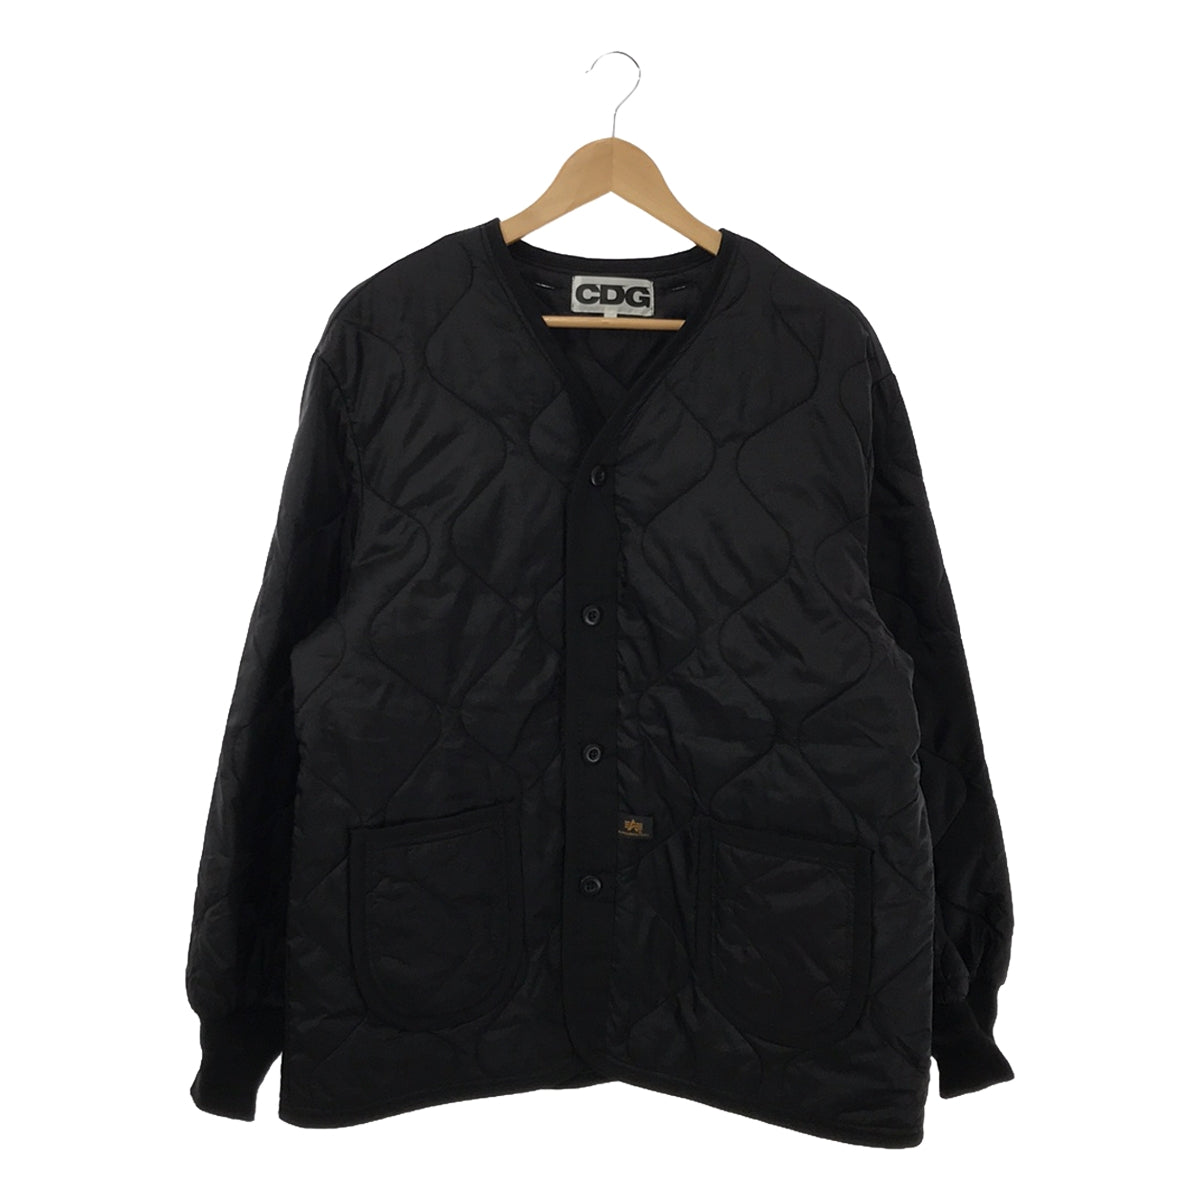 CDG by Comme des Garcons. / シーディージー コムデギャルソン ...